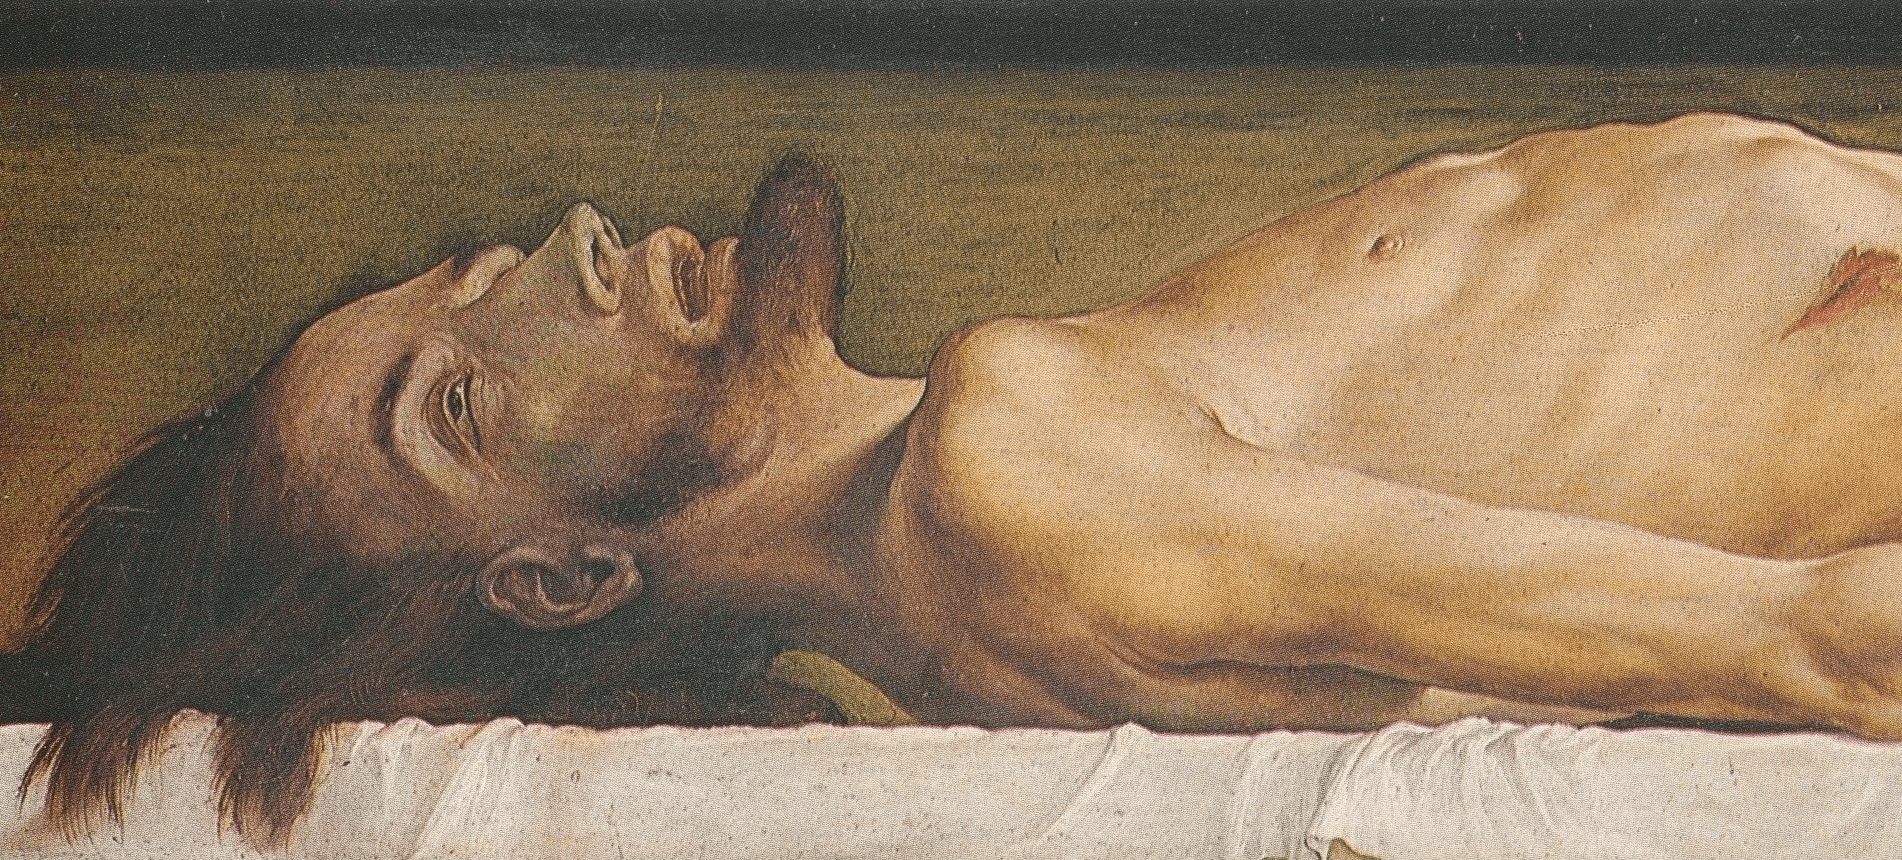 A painting that features prominently in the novel, Dead Christ in the Tomb.